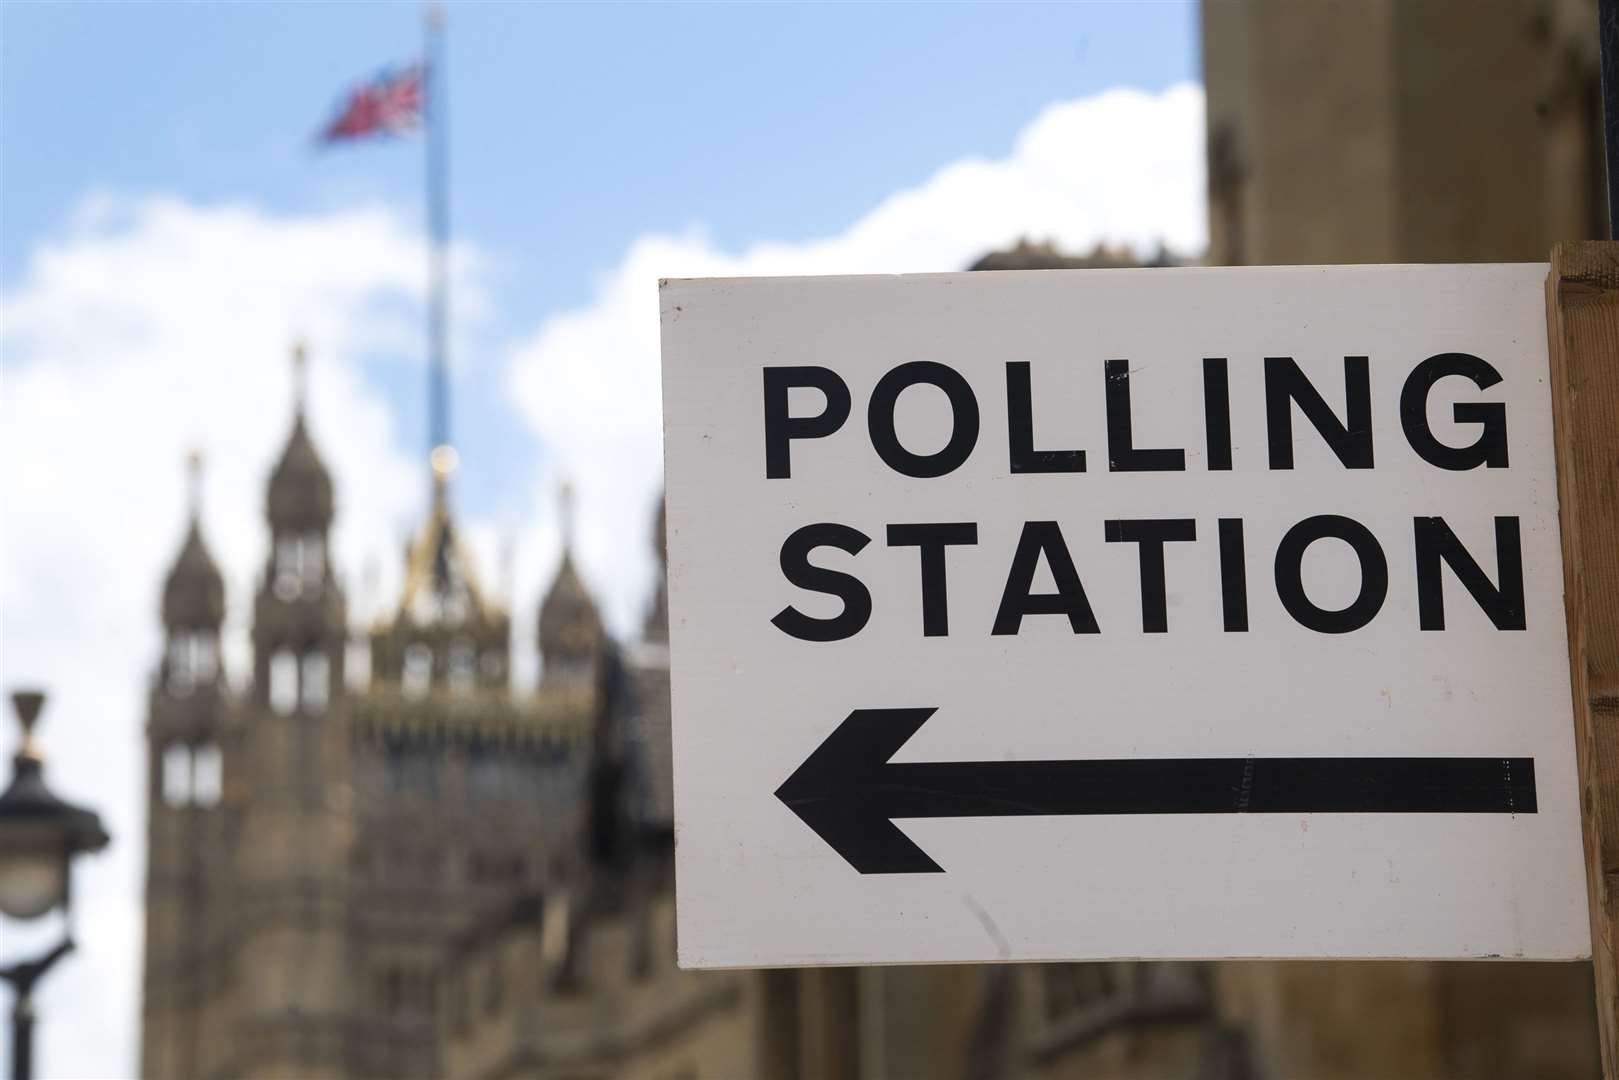 Voters in England will have to show photo ID when arriving at polling stations. (Victoria Jones, PA)